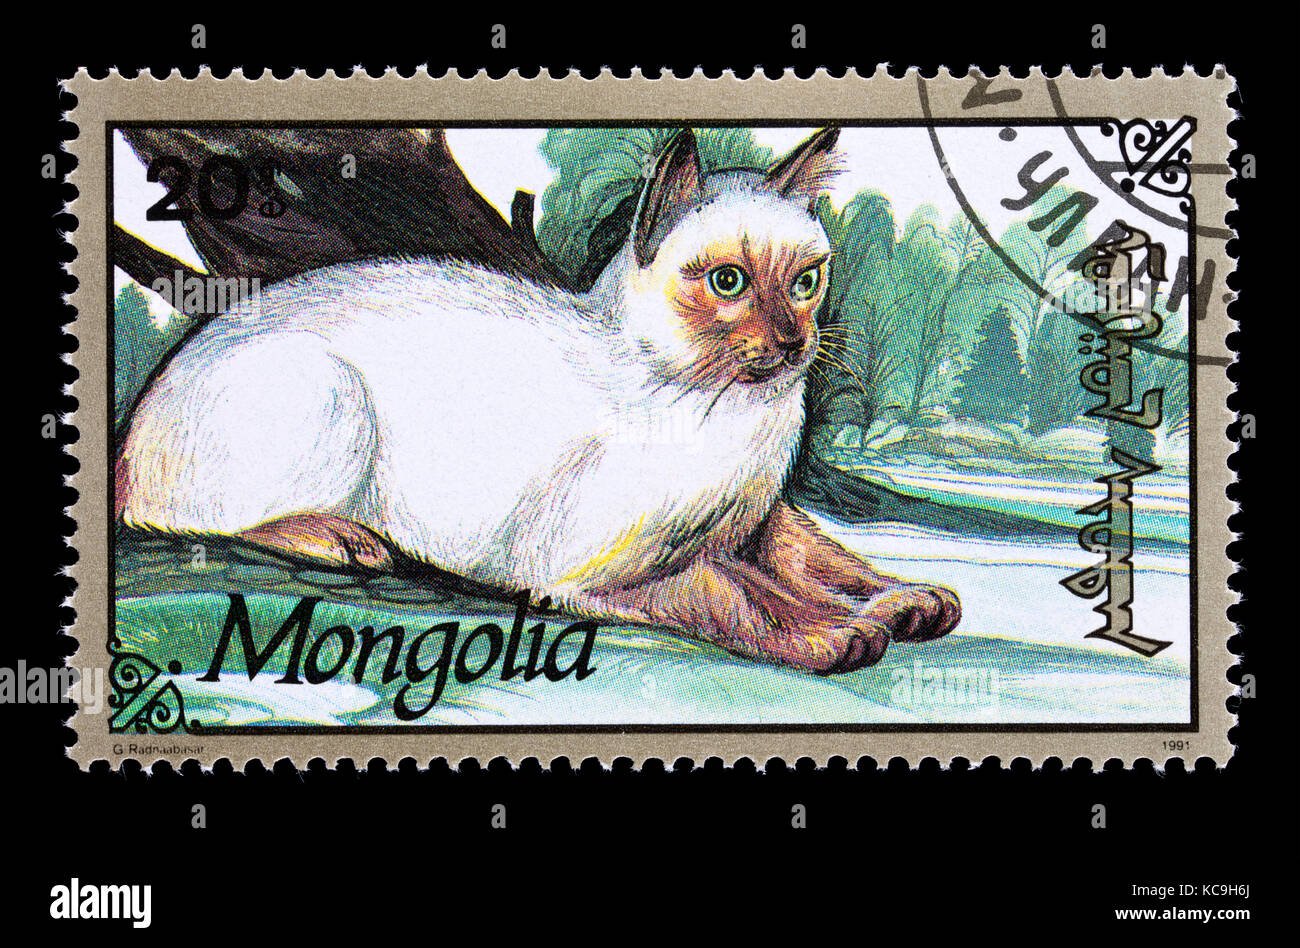 Postage stamp from Mongolia depicting a house cat. Stock Photo